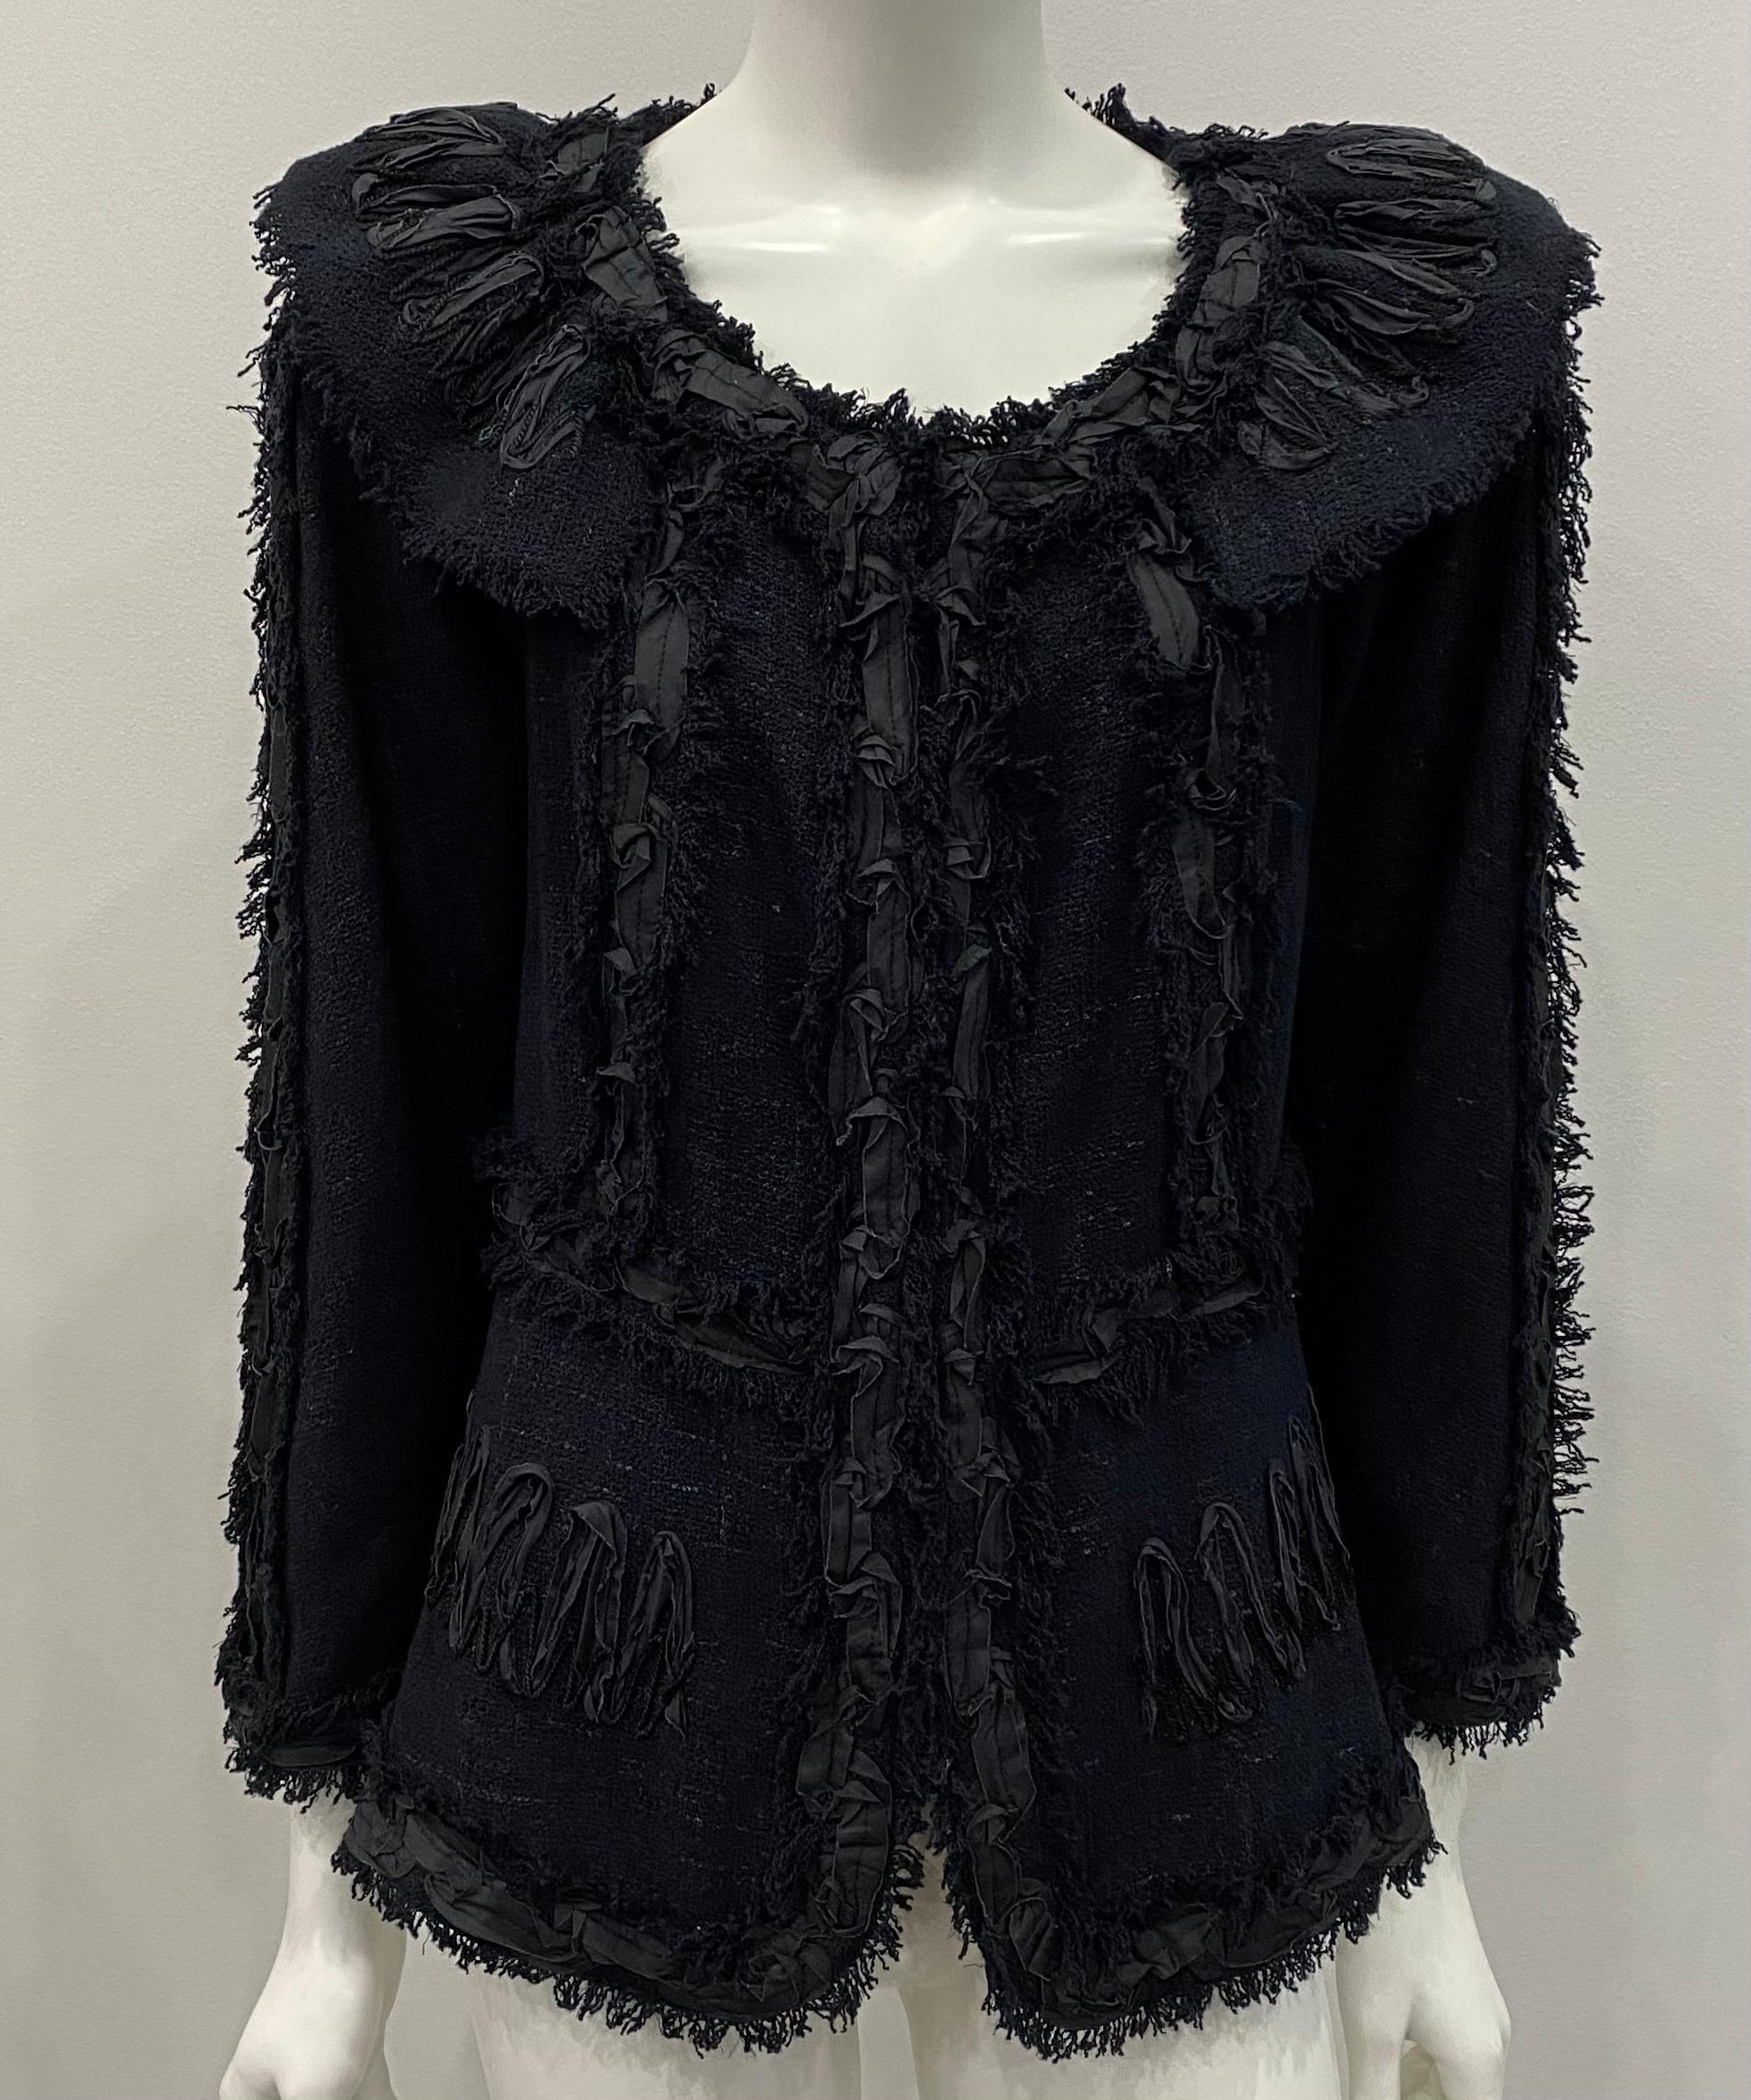 Chanel Black Ribbon and Cording Appliqué Cotton Blend Jacket with matching skirt. Size 40 - 2009P Collection. This fabulous Chanel Jacket is 95% cotton, fully lined in a black silk CC and camellia print with the iconic silver chain at the inside